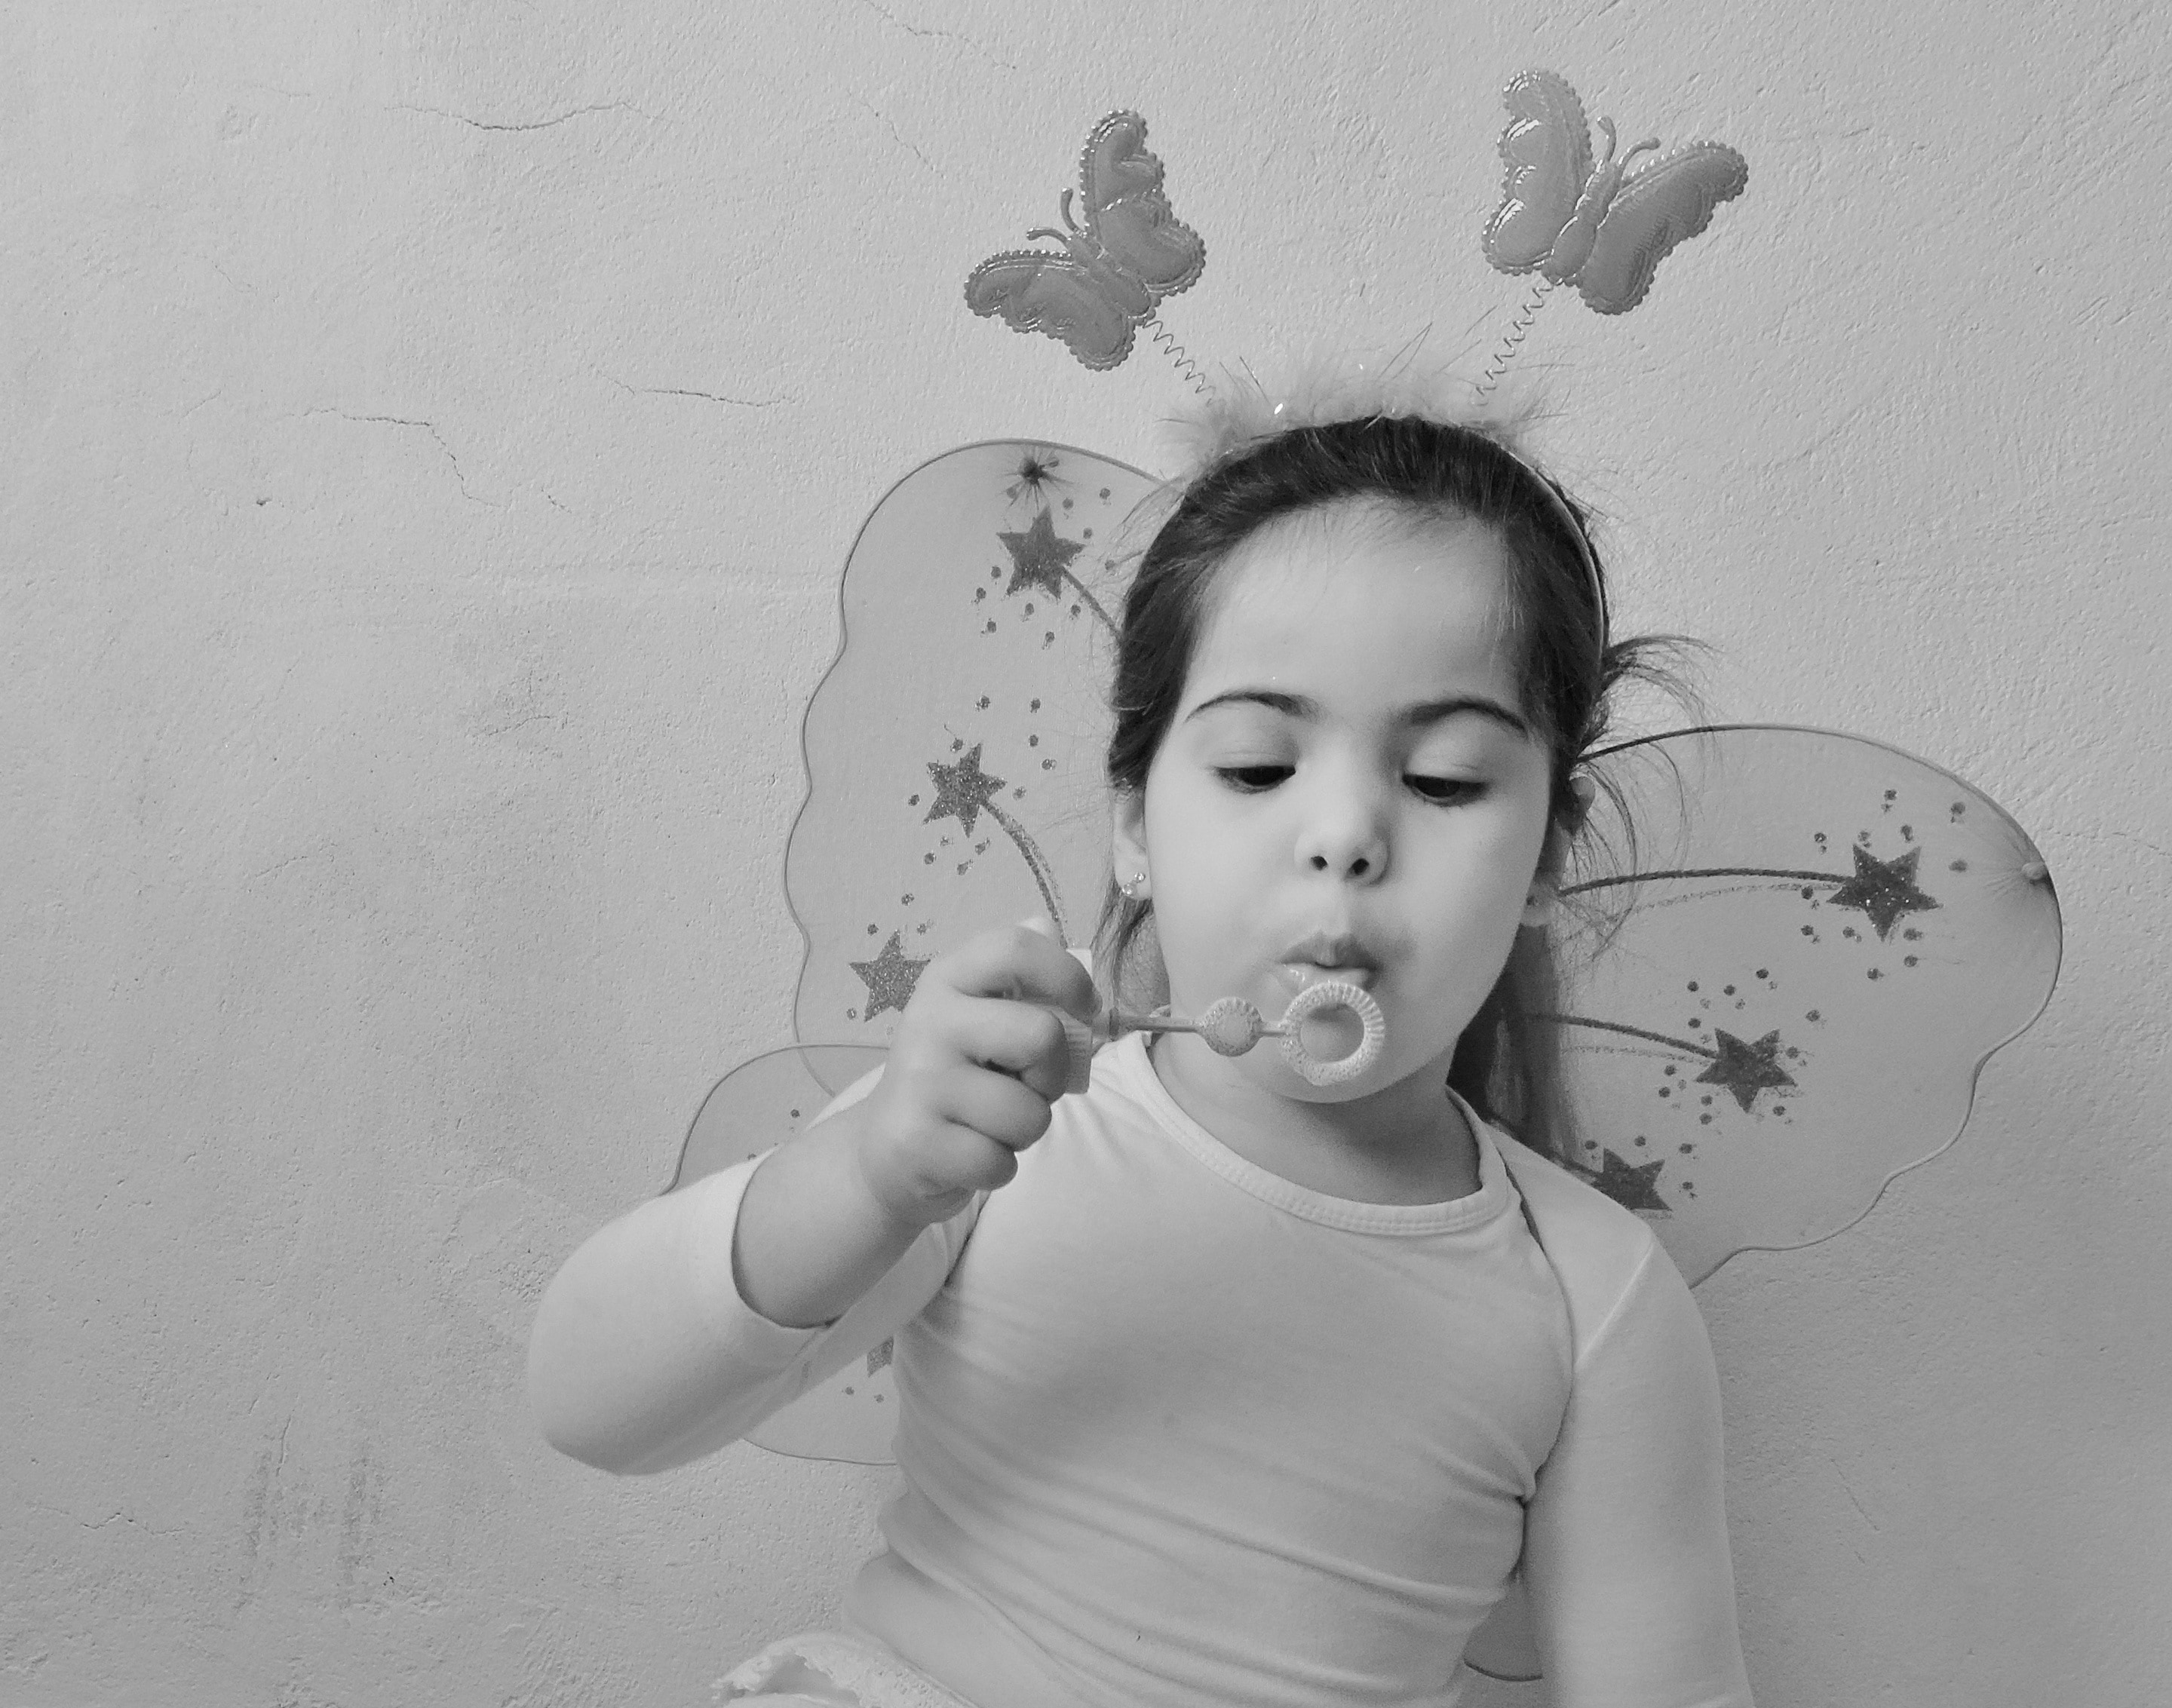 gray scale photo of girl wearing butterfly costume blowing bubbles